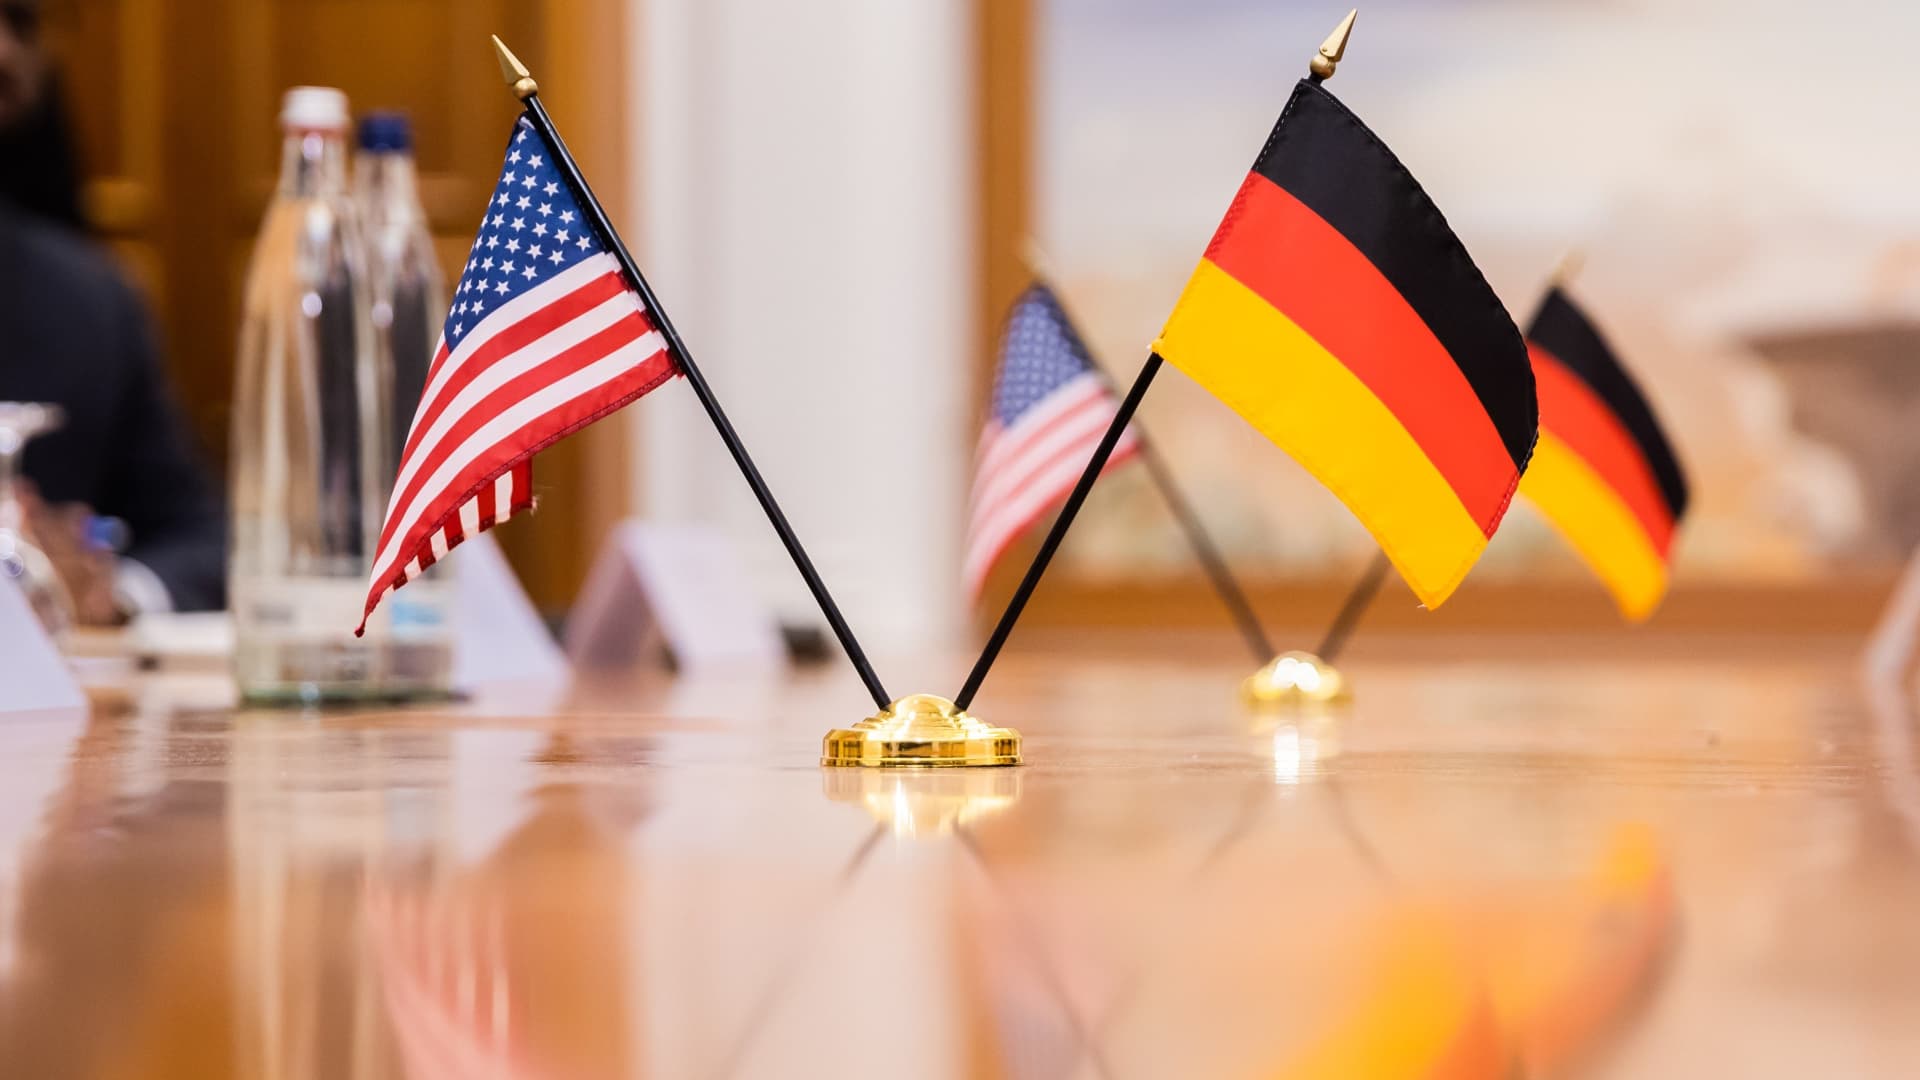 The U.S. is now Germany’s biggest trading partner ahead of China